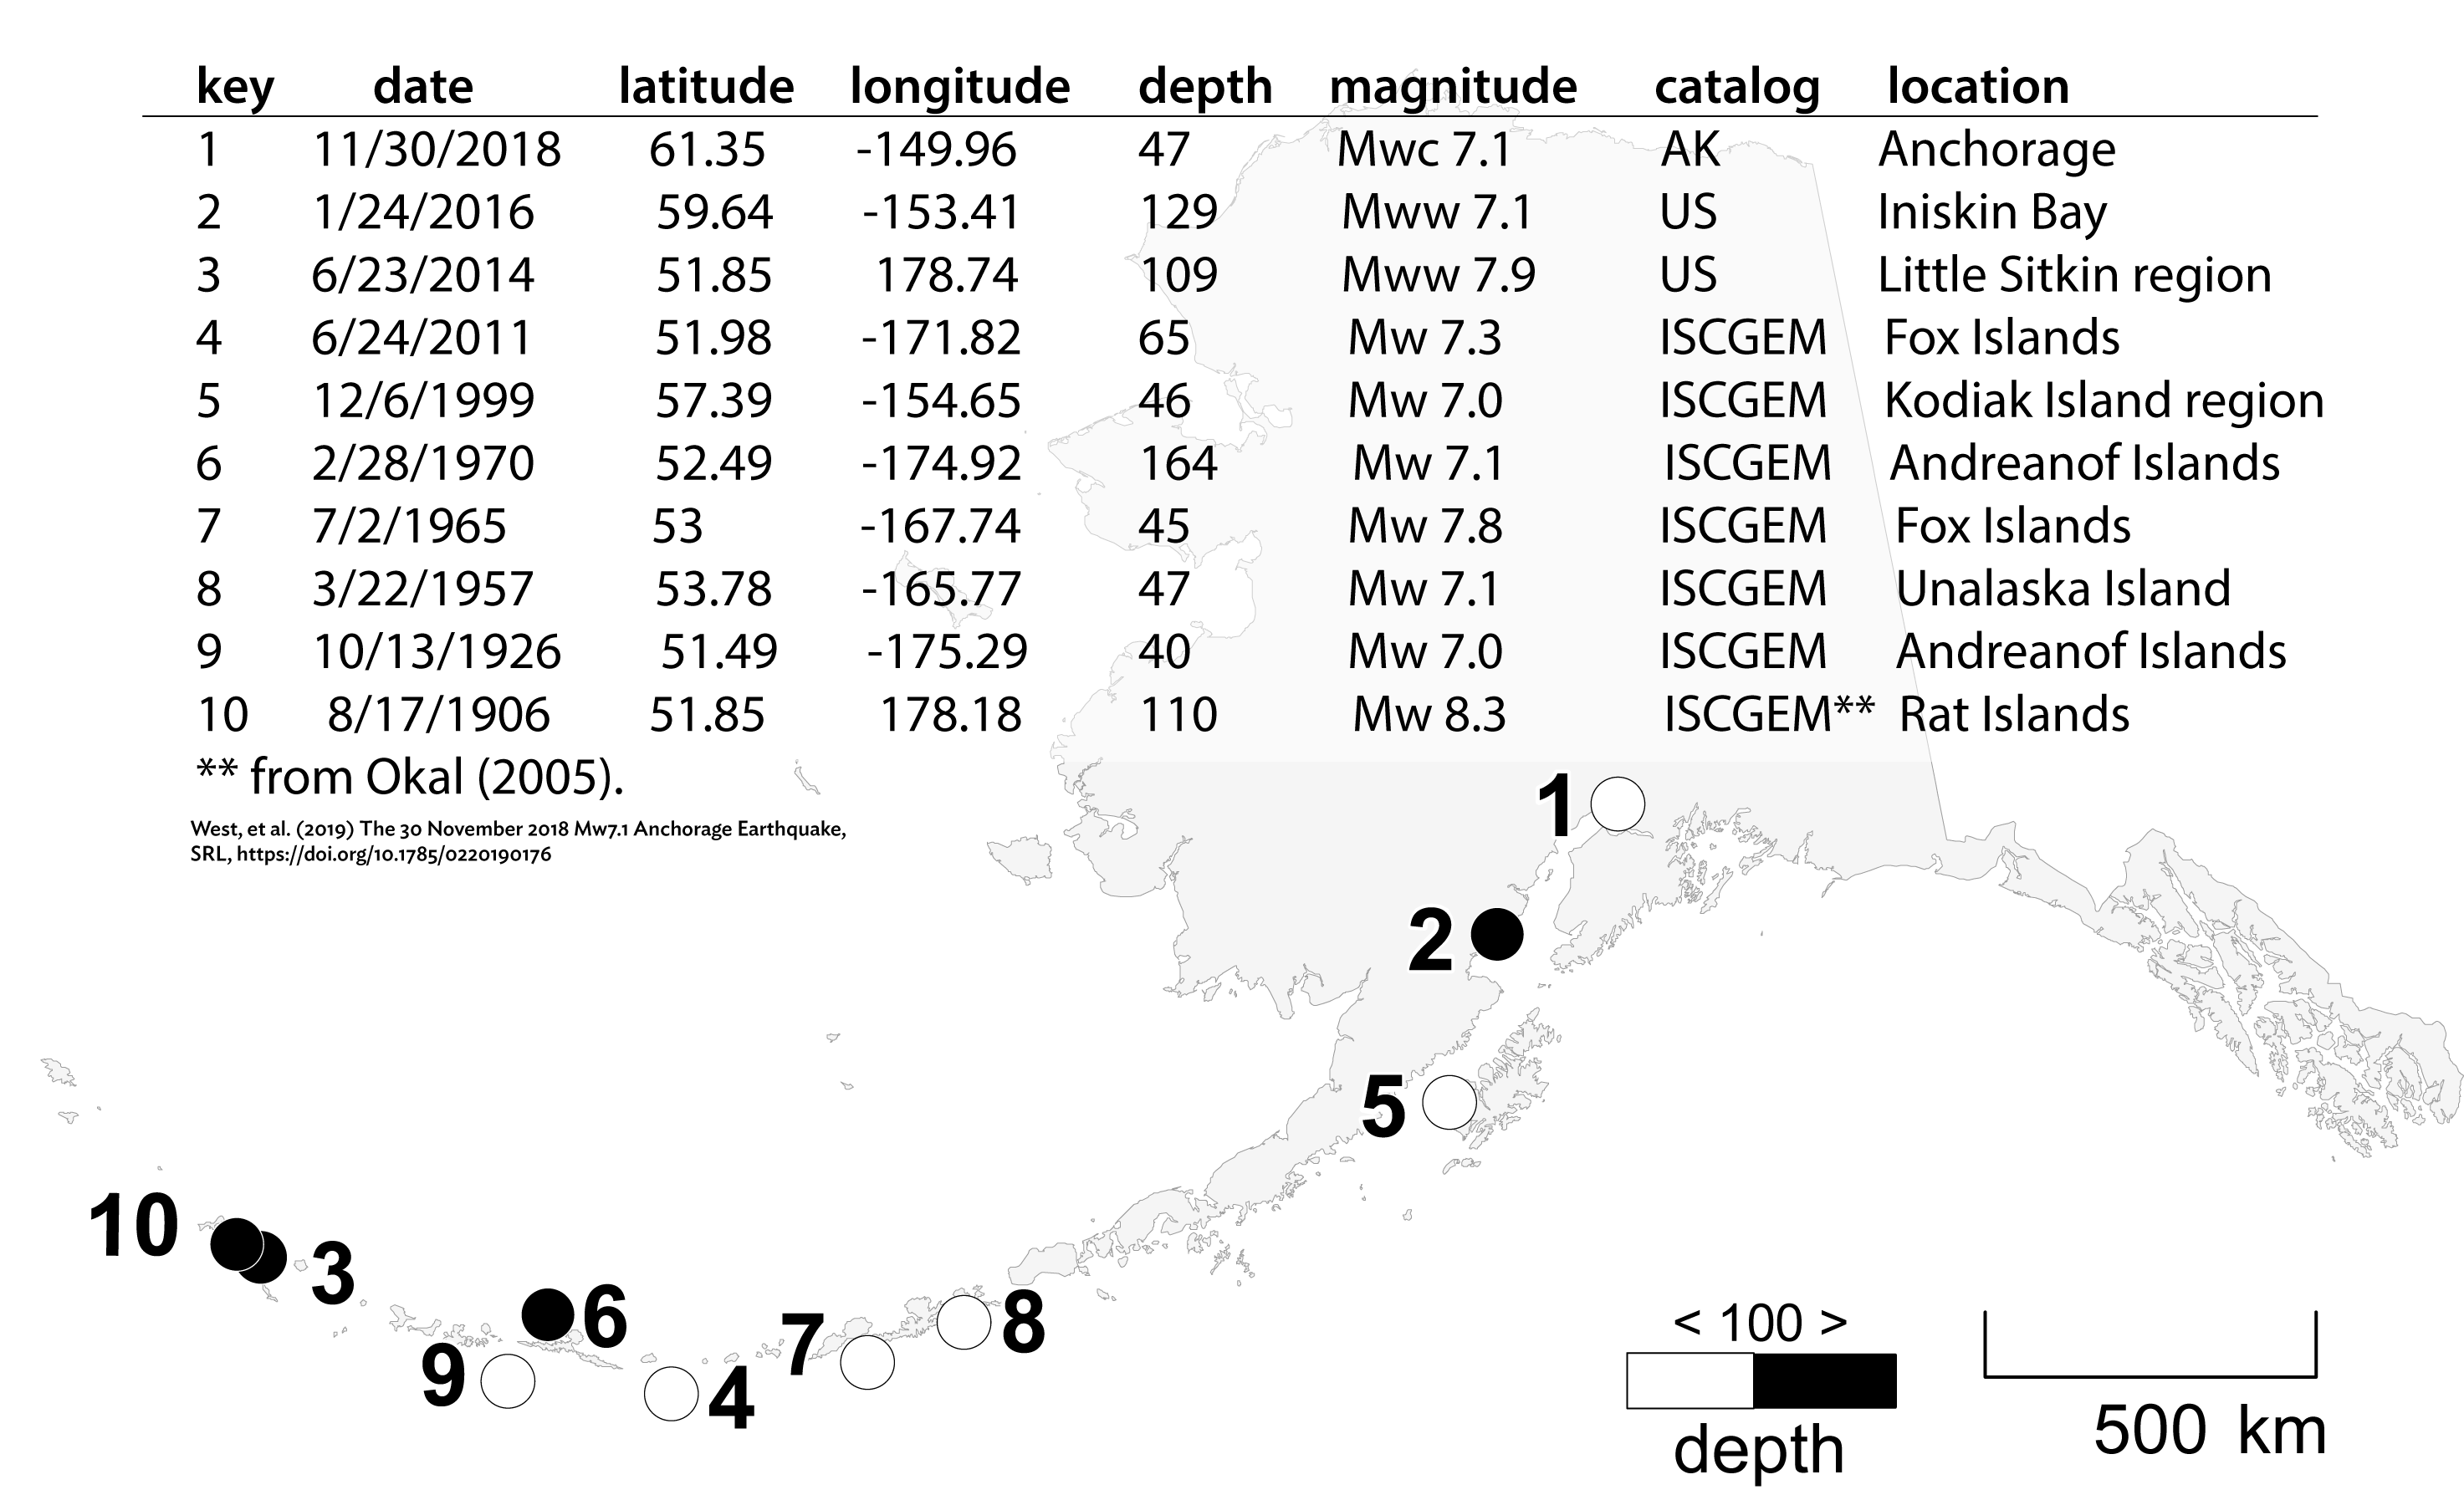 Table and locations of previous intraplate earthquakes in Alaska with magnitudes greater than 7.